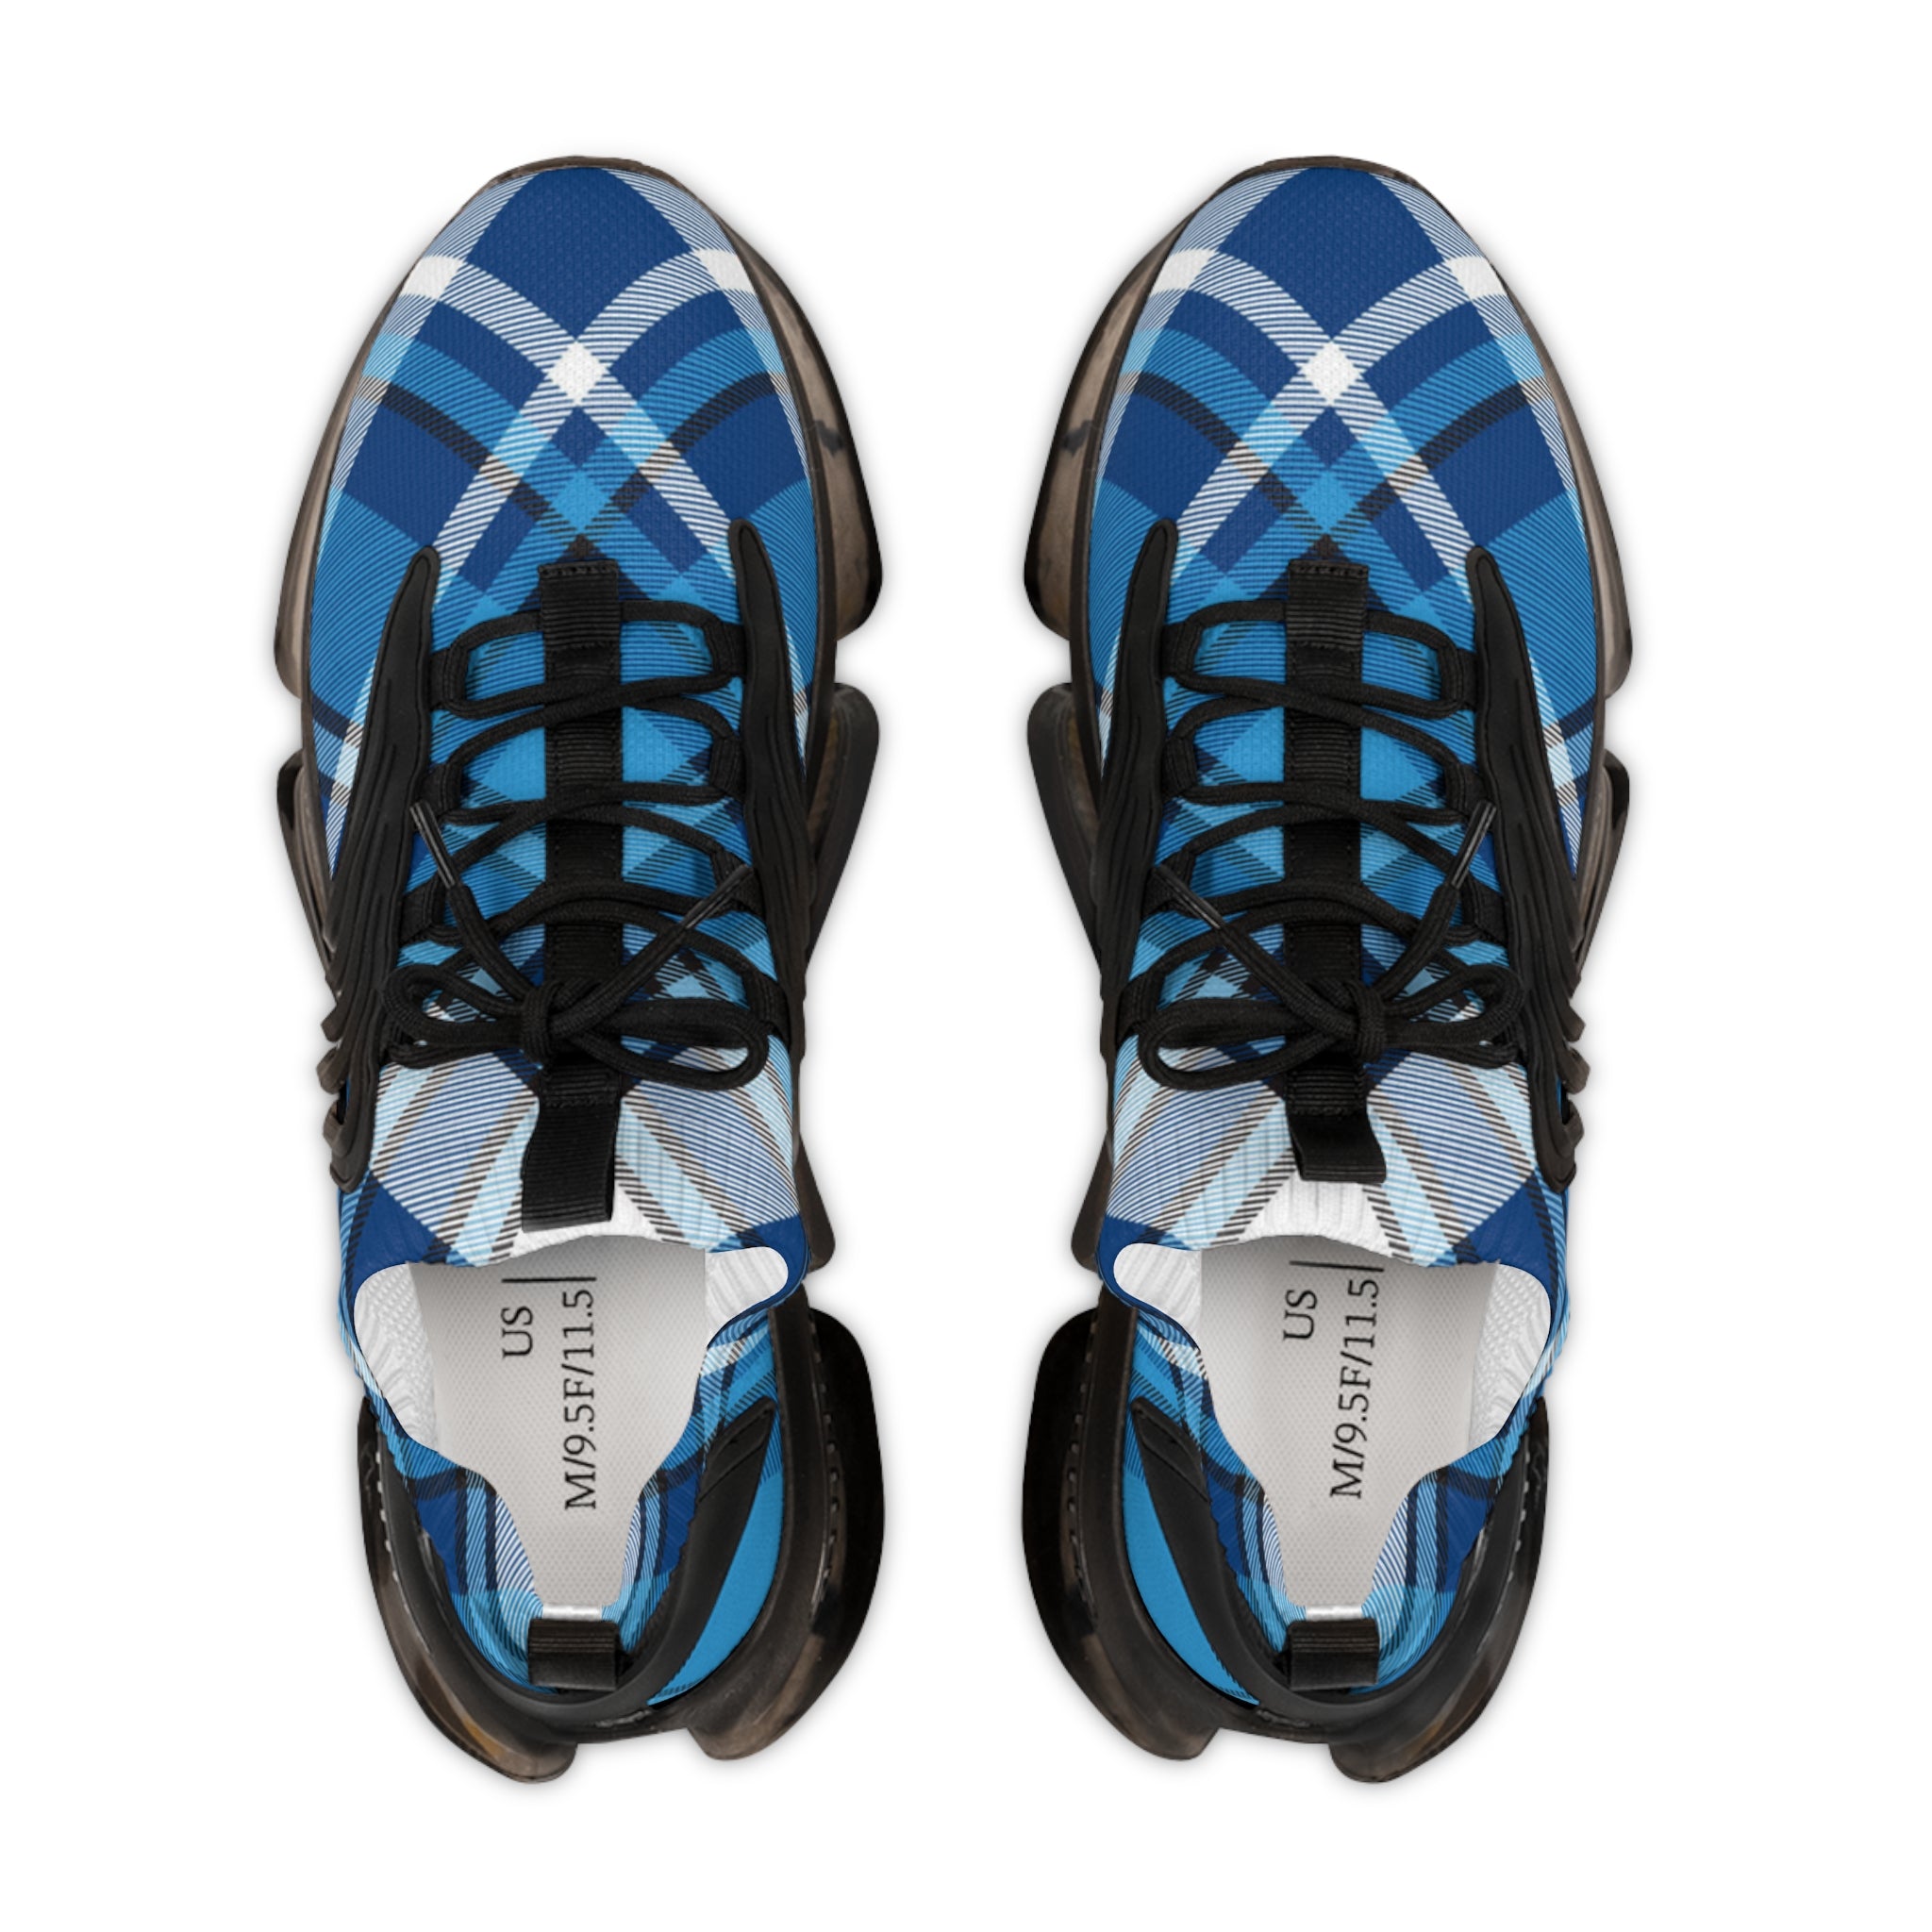 Groove Fashion Collection Blue Plaid Men's Mesh Sneakers with Black or White Sole